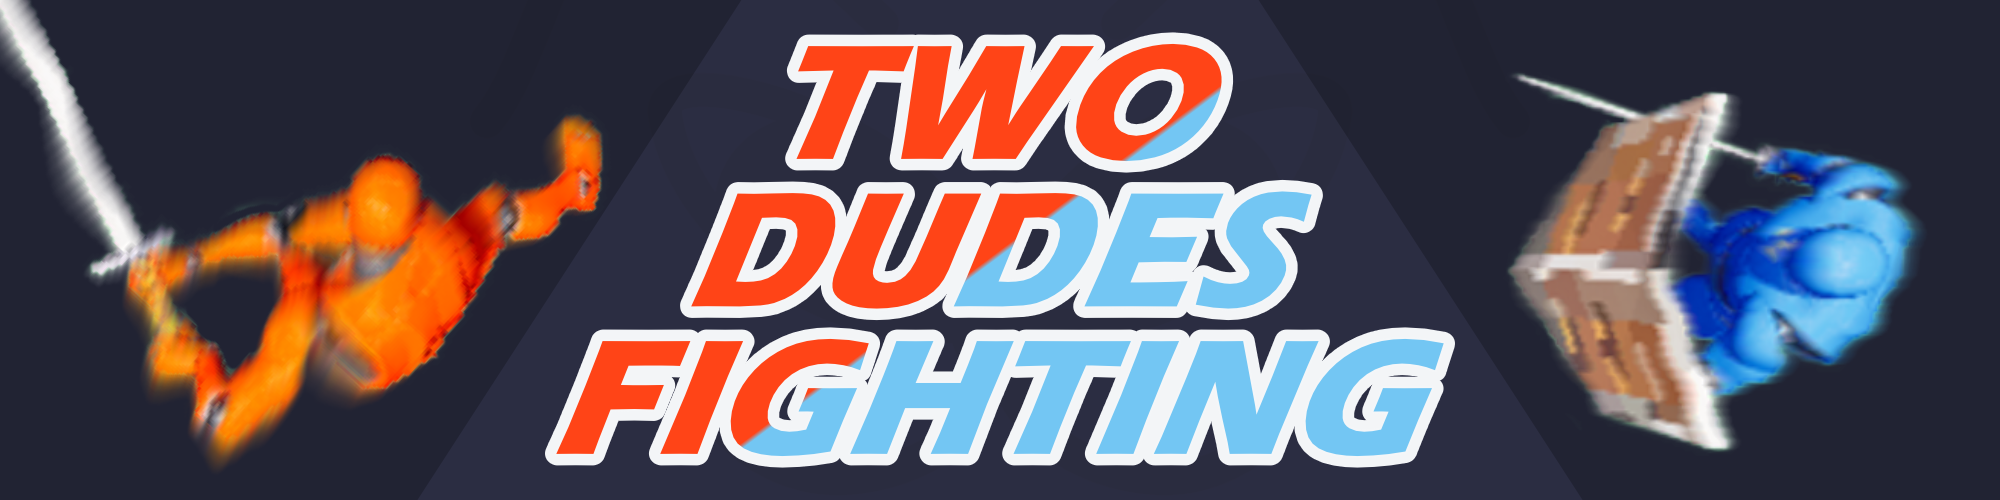 Two Dudes Fighting